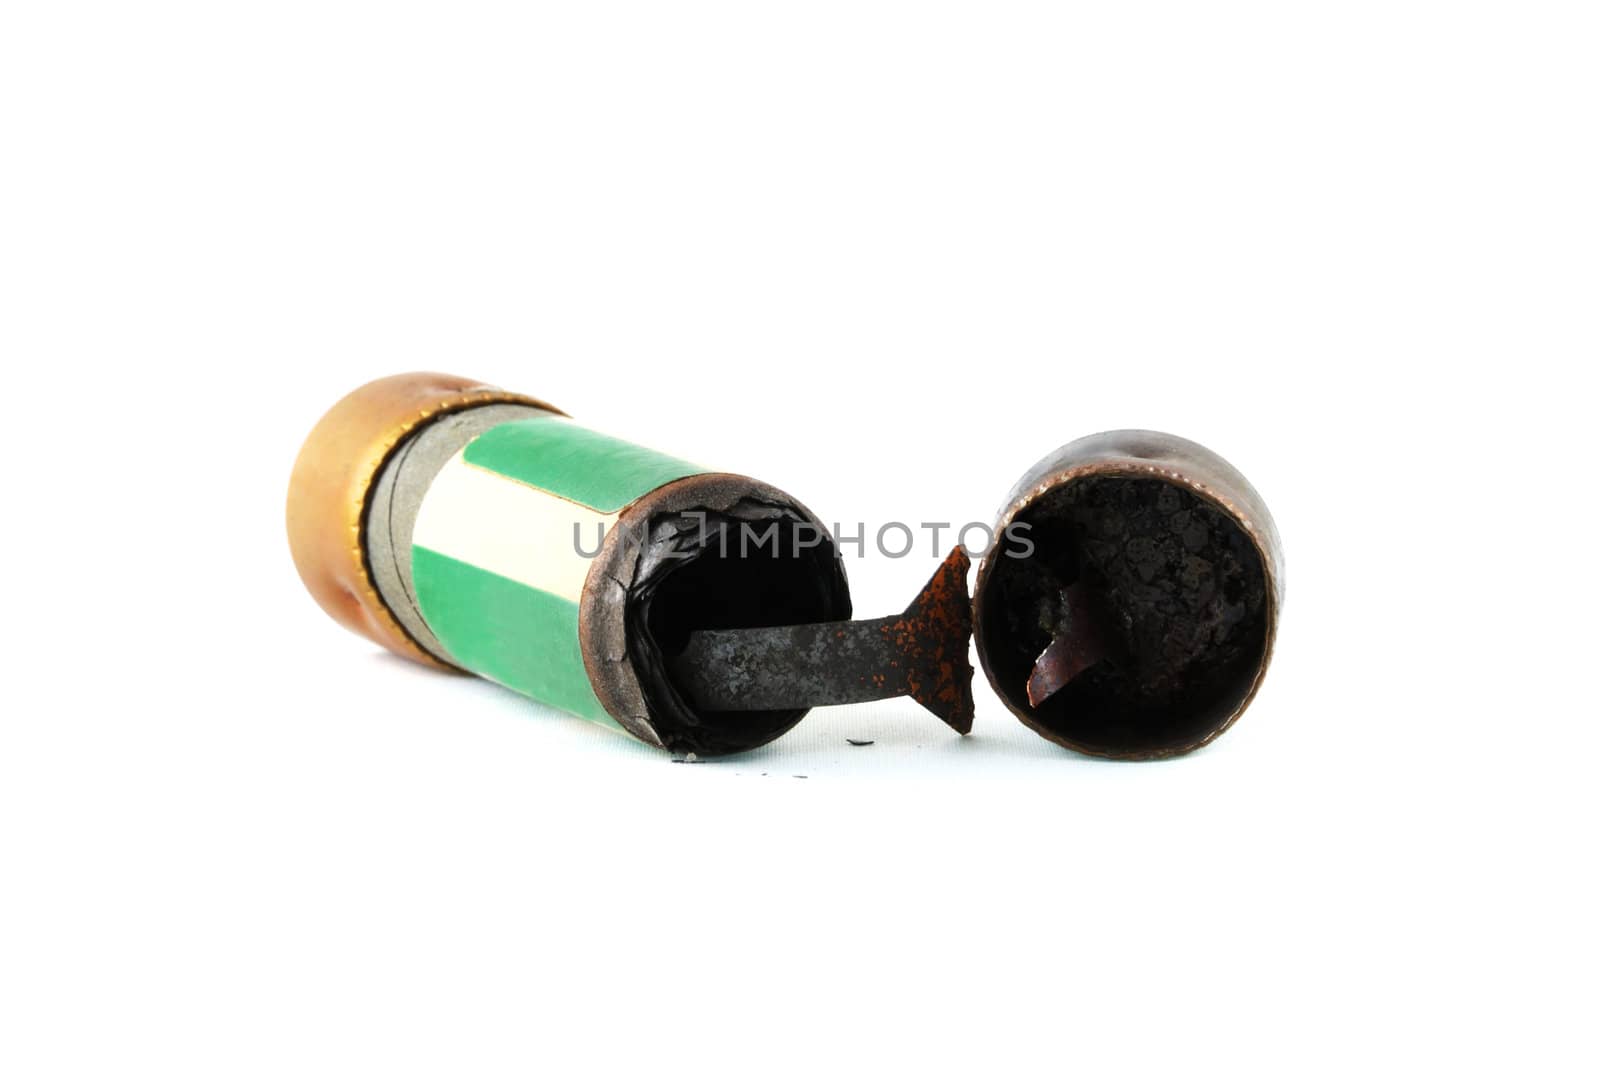 Blown fuse broken in two pieces isolated over white background.